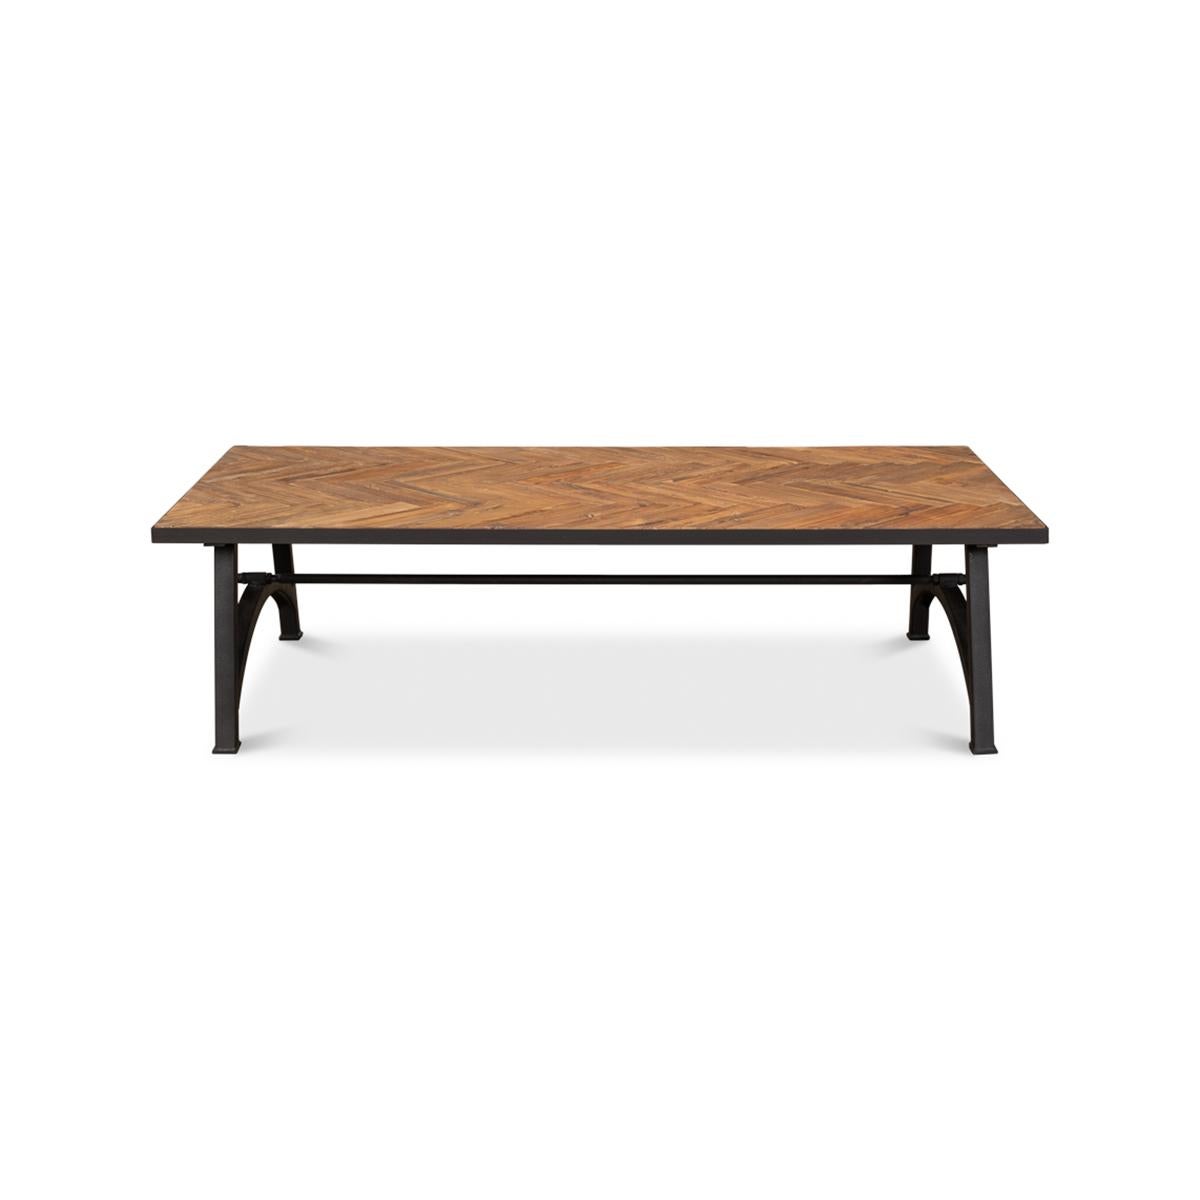 Made with reclaimed wood, this large coffee table features a herringbone parquetry inlaid wooden top. Raised on an iron strecher base that provides a sturdy architectural design.

Dimensions: 67